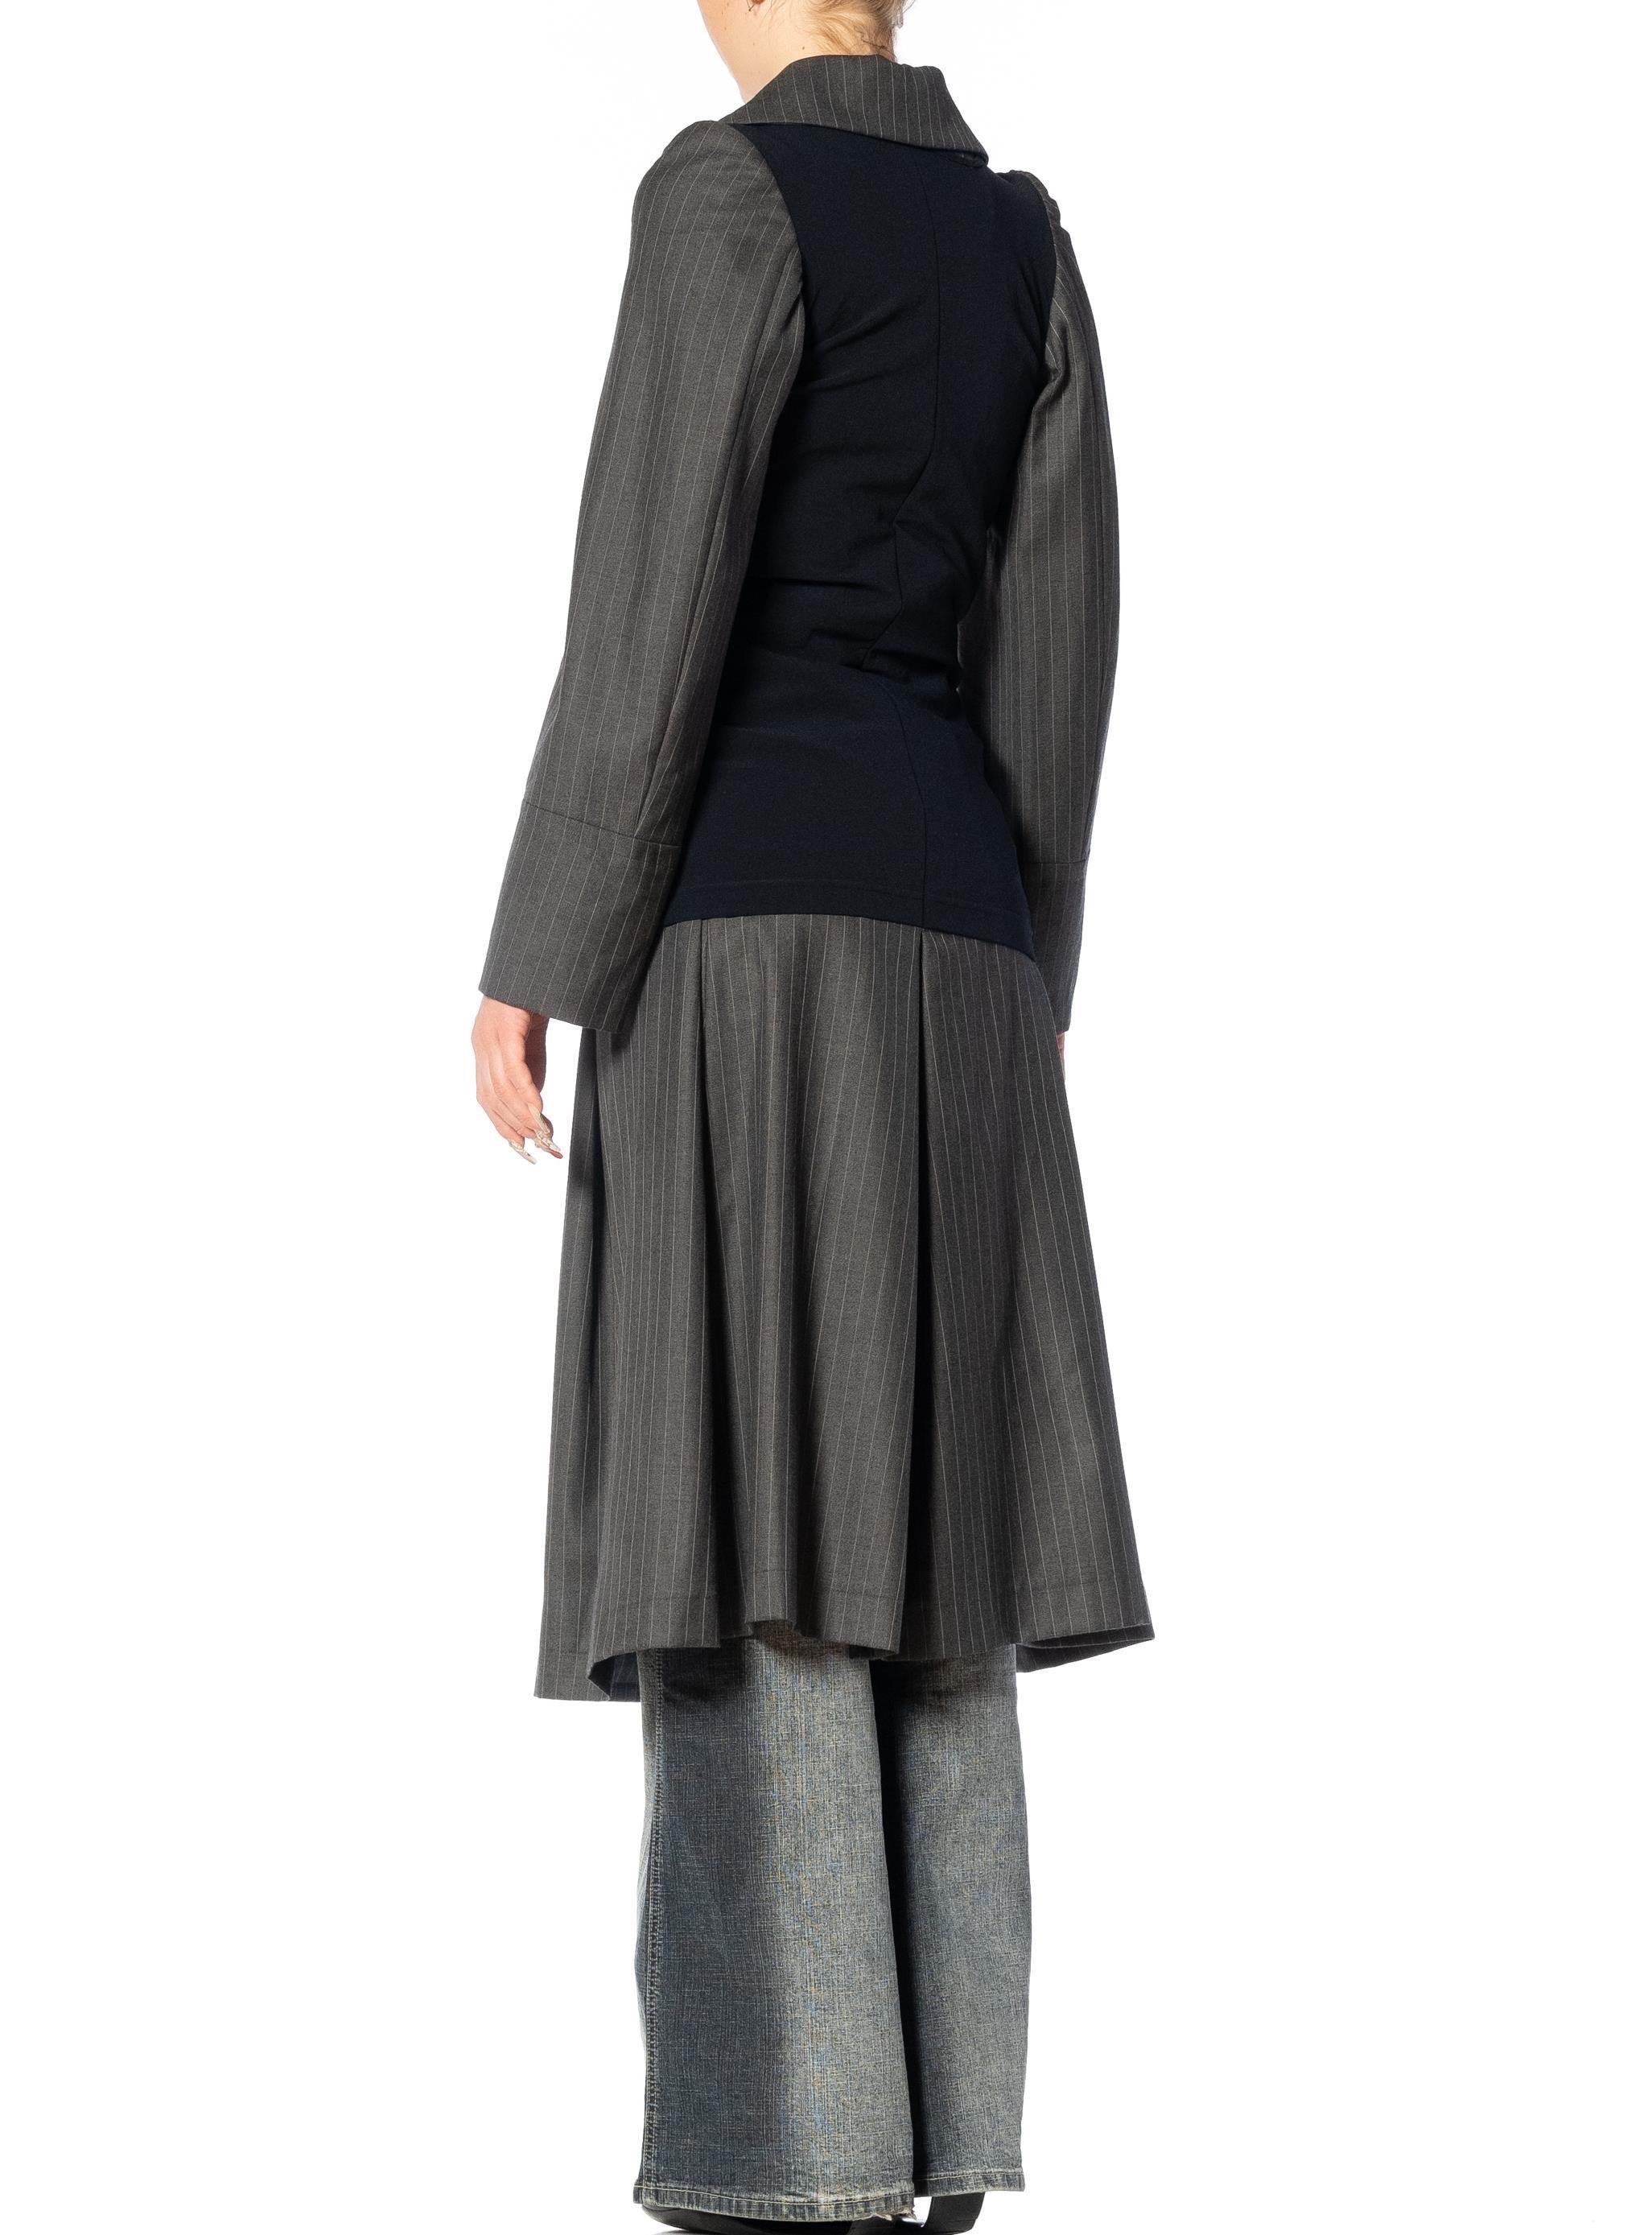 2000S COMME DES GARCONS Gray & Navy Wool Coat With Shrunken Poly Over-Layer 2007 For Sale 7